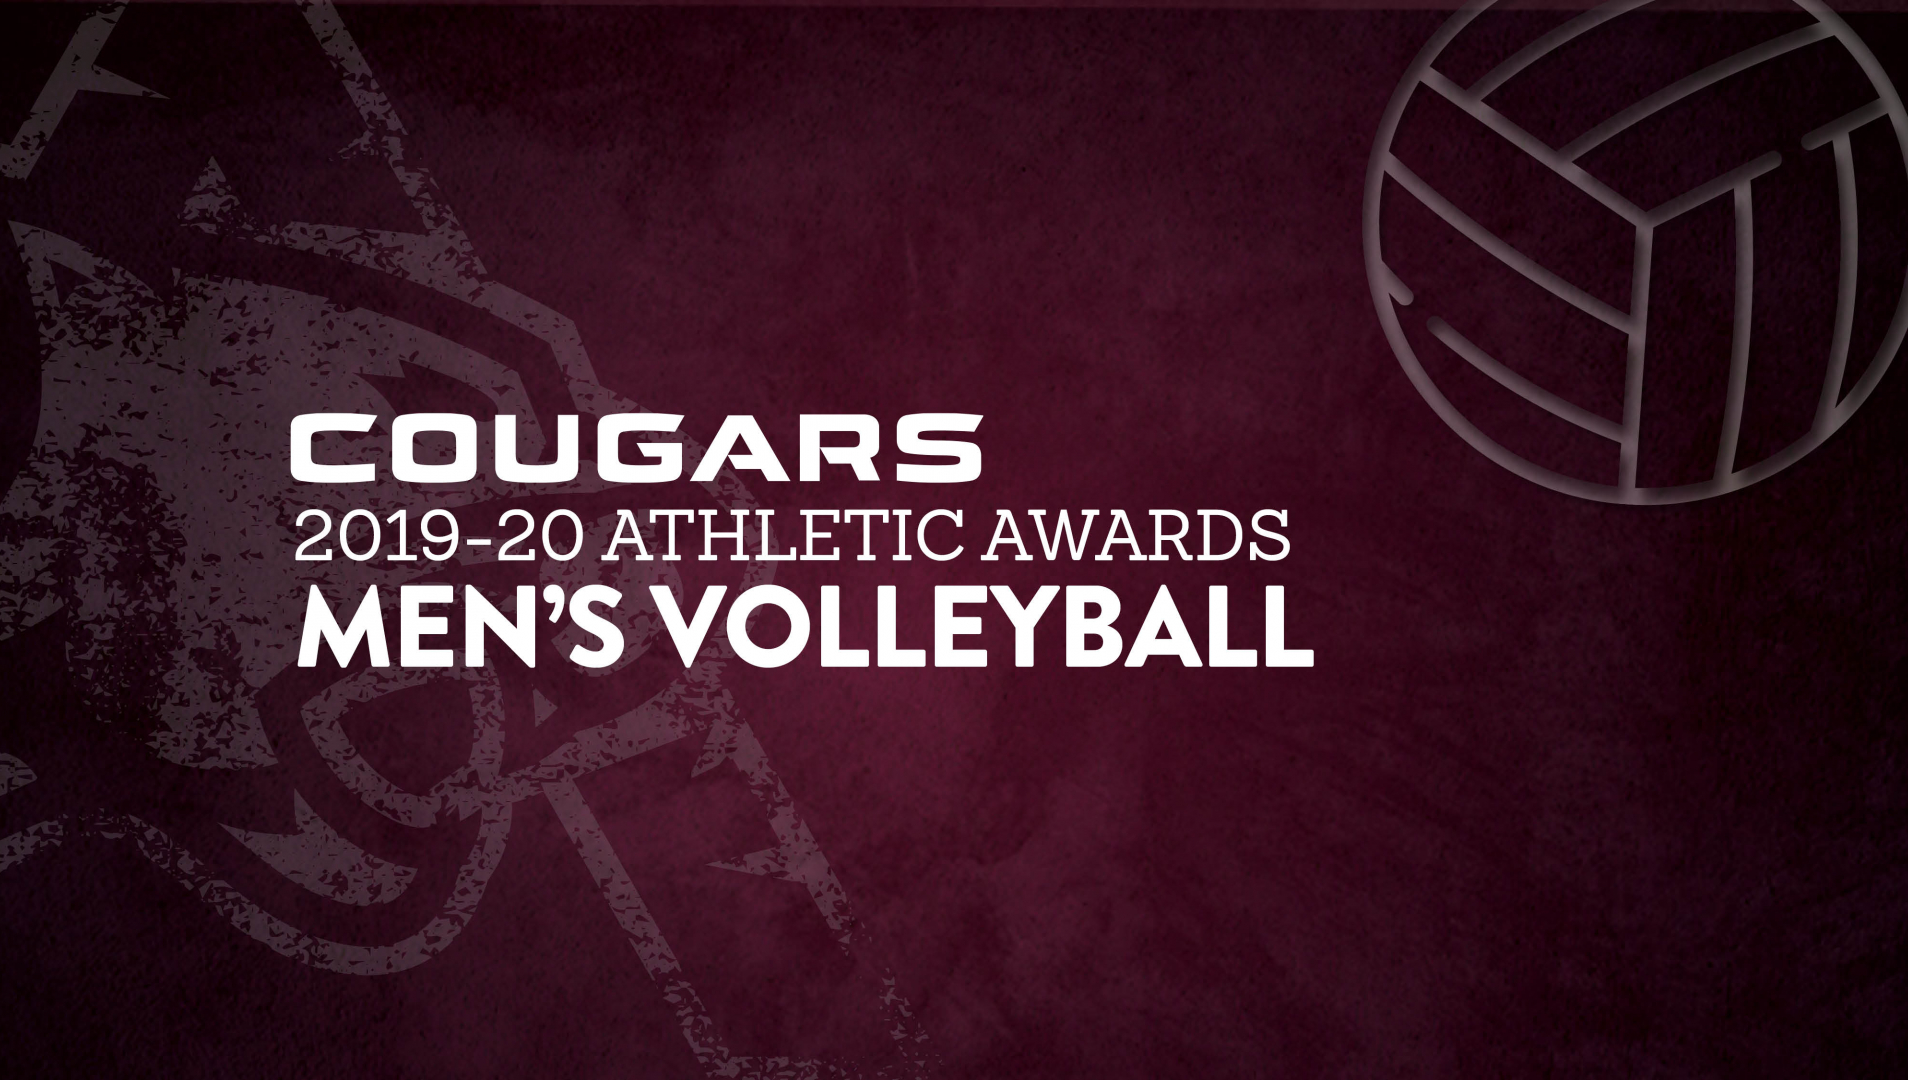 Cougars’ Men’s Volleyball Announce Award Winners